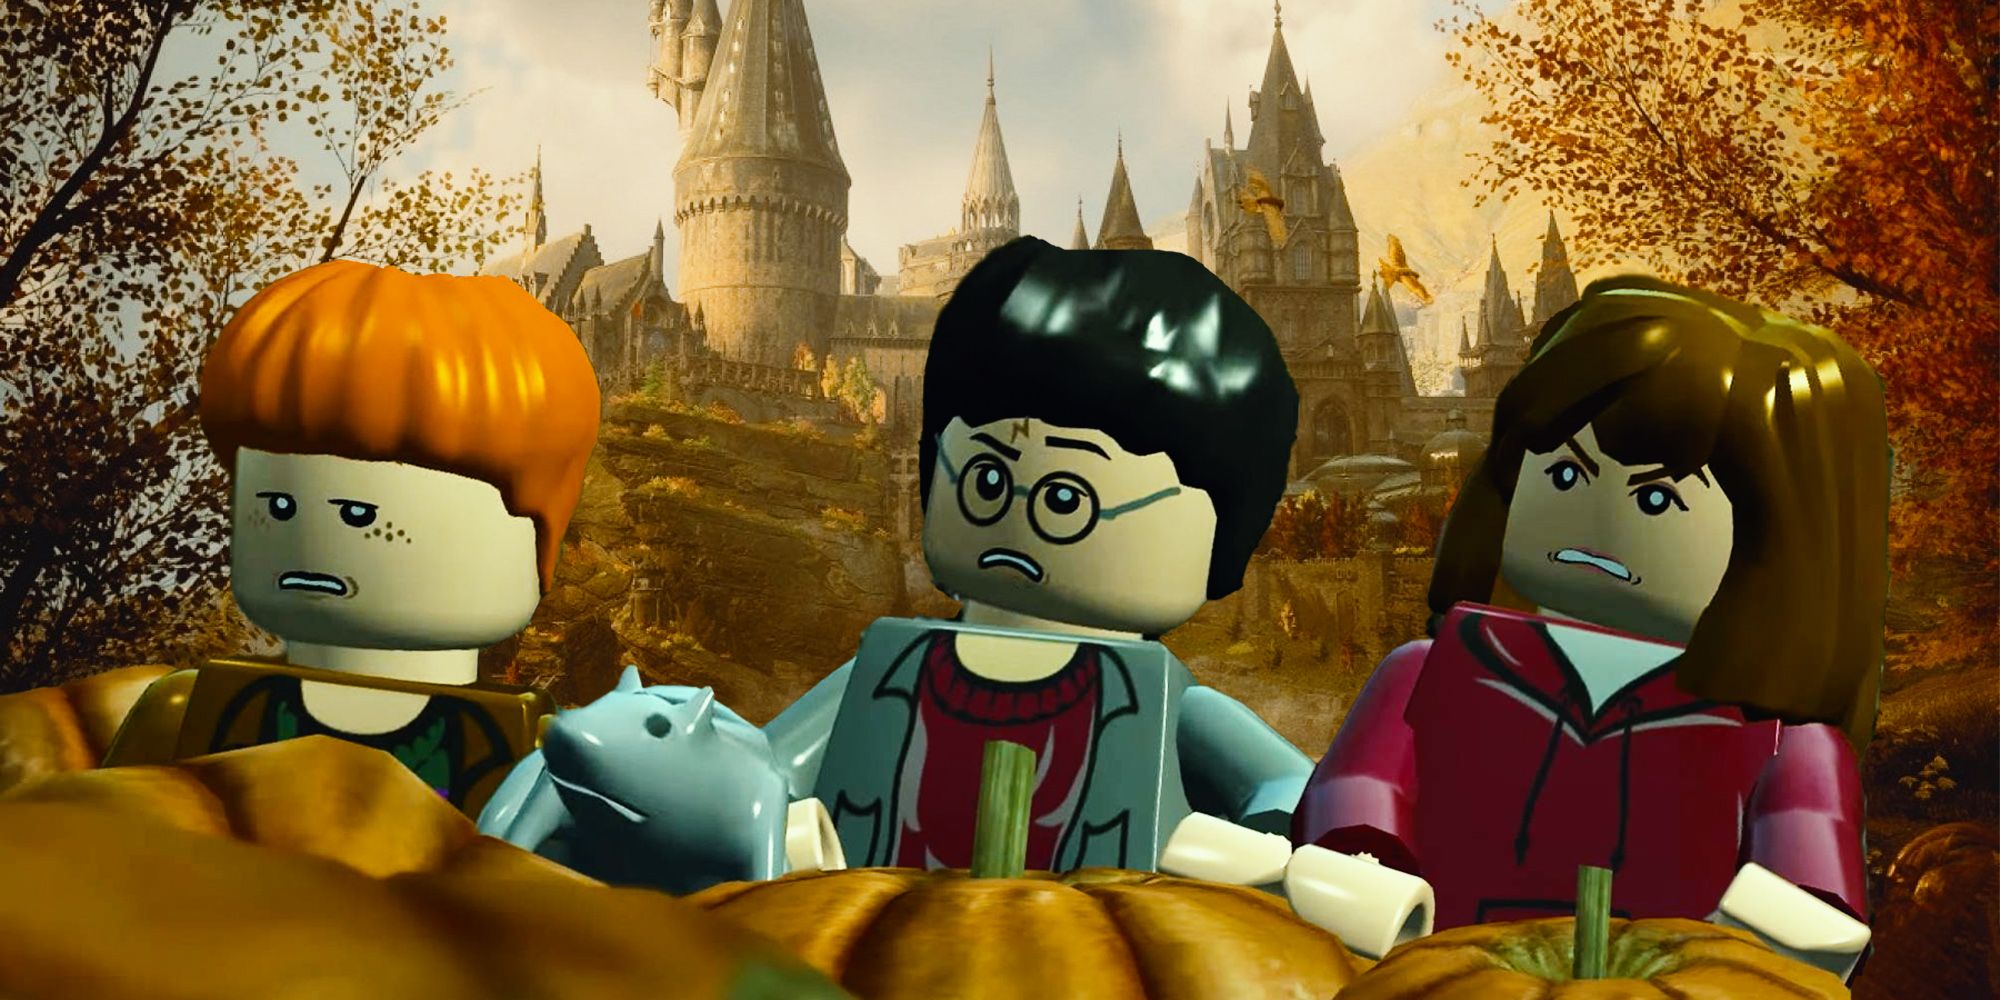 LEGO minifigure versions of Ron Weasley, Harry Potter, and Hermione Granger hiding behind a pile of pumpkins. All three have unamused looks on their faces. The background has been replaced with a shot of Hogwarts Castle from Hogwarts Legacy, where the time appears to be near dusk and the castle is framed by trees with autumn leaves.